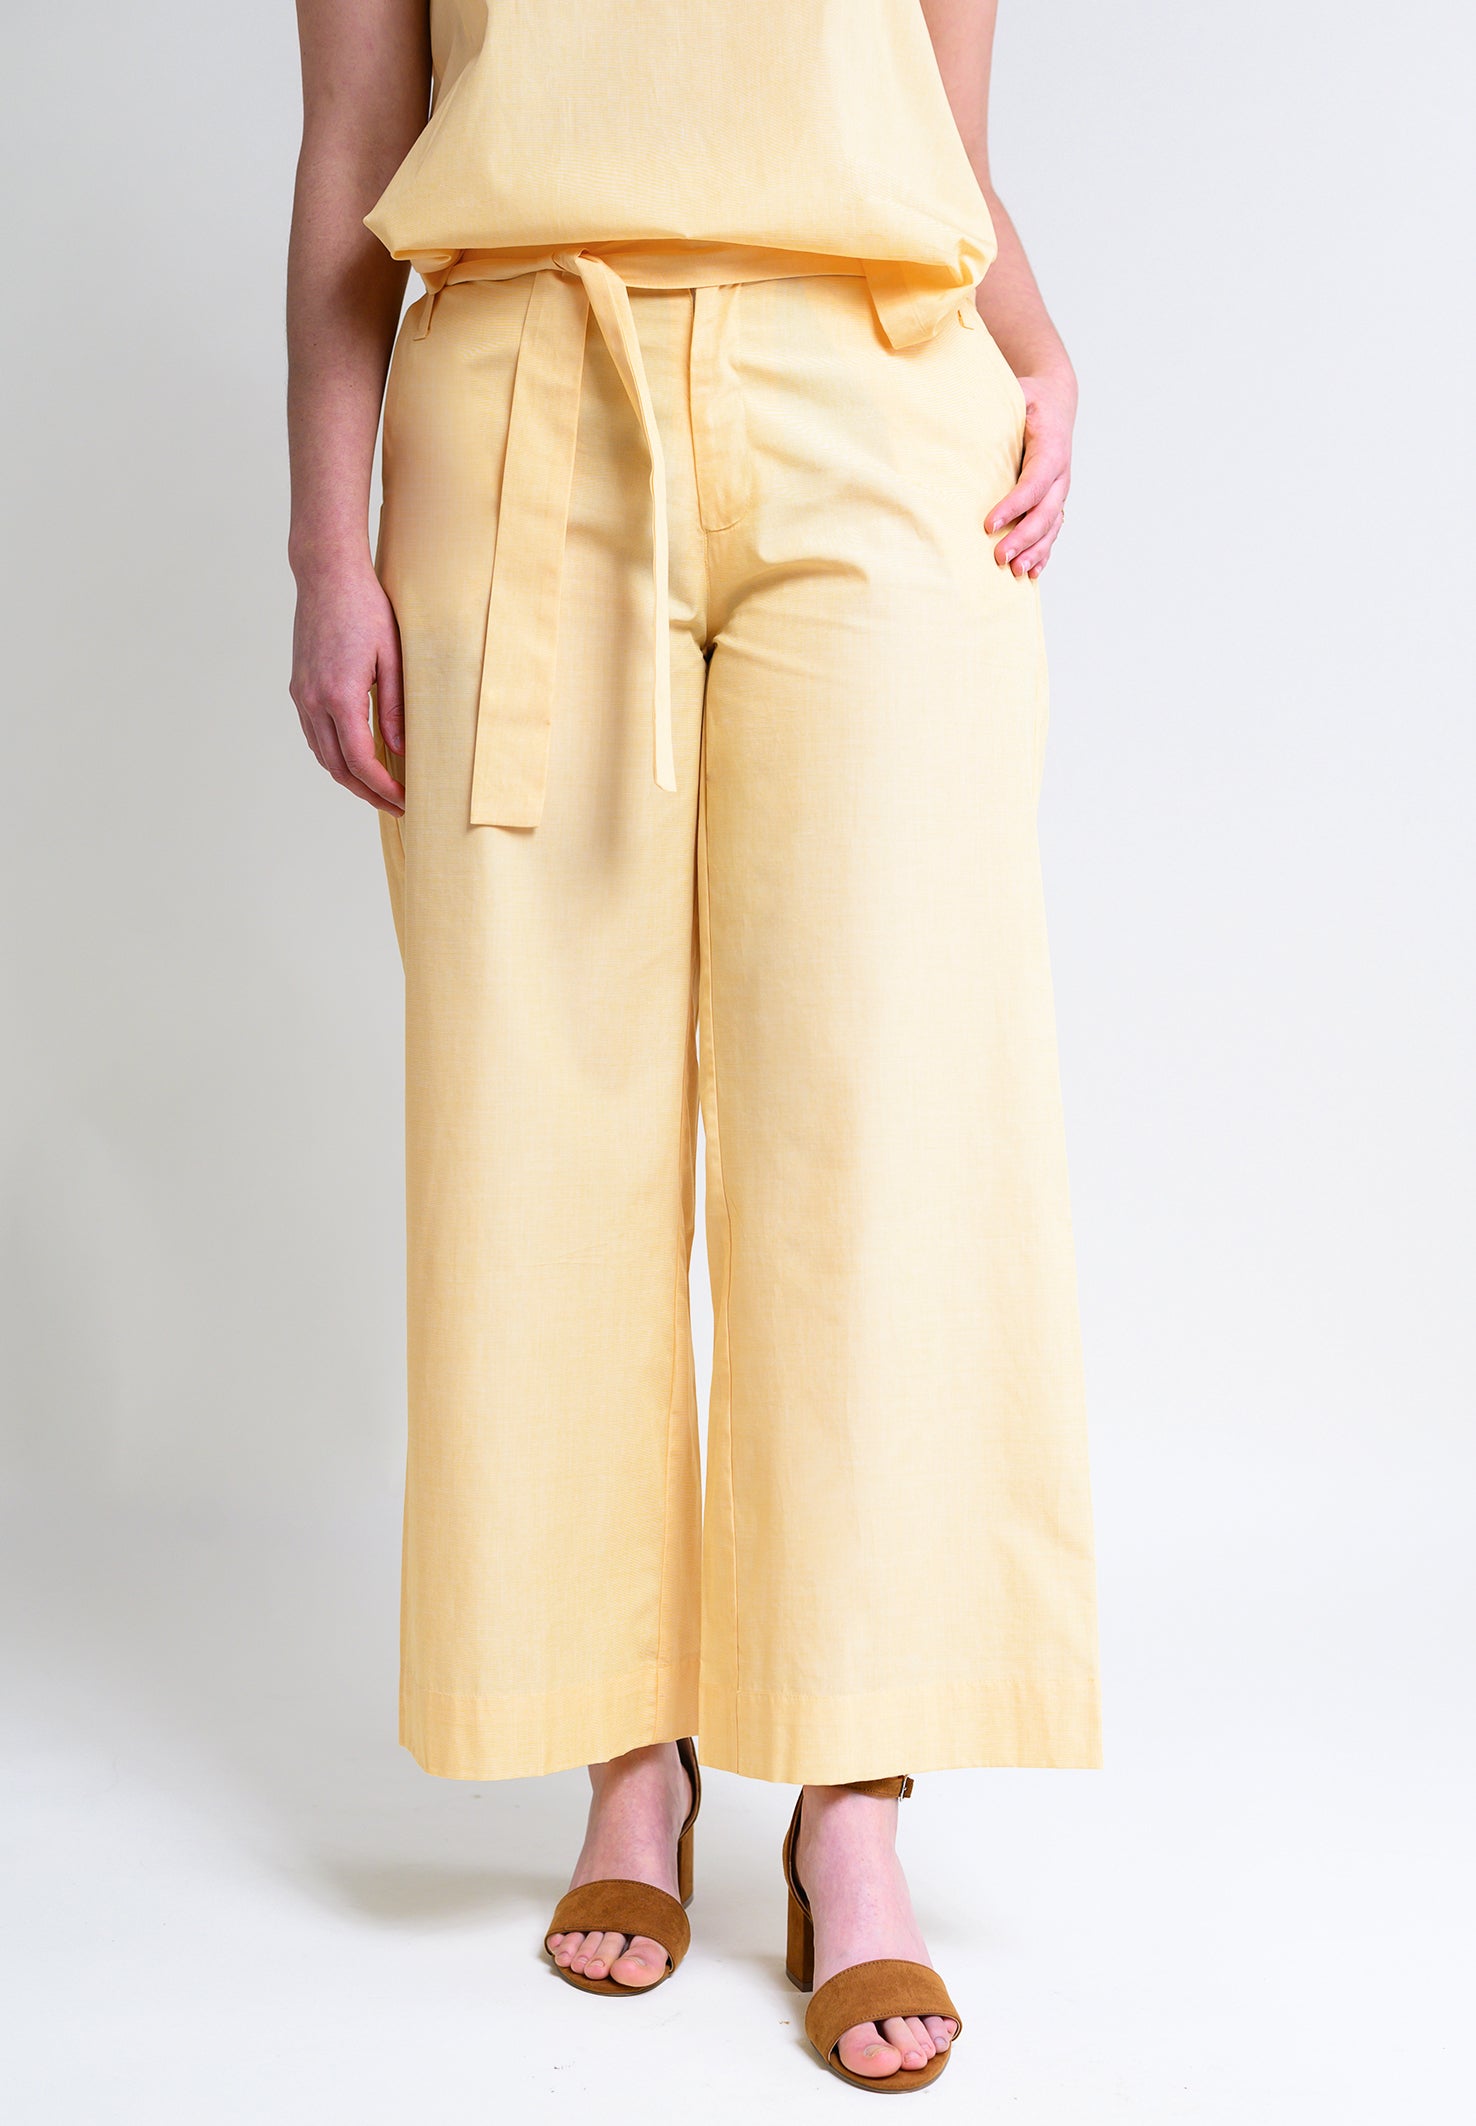 Culottes TERNAA in light yellow made from 100% organic cotton